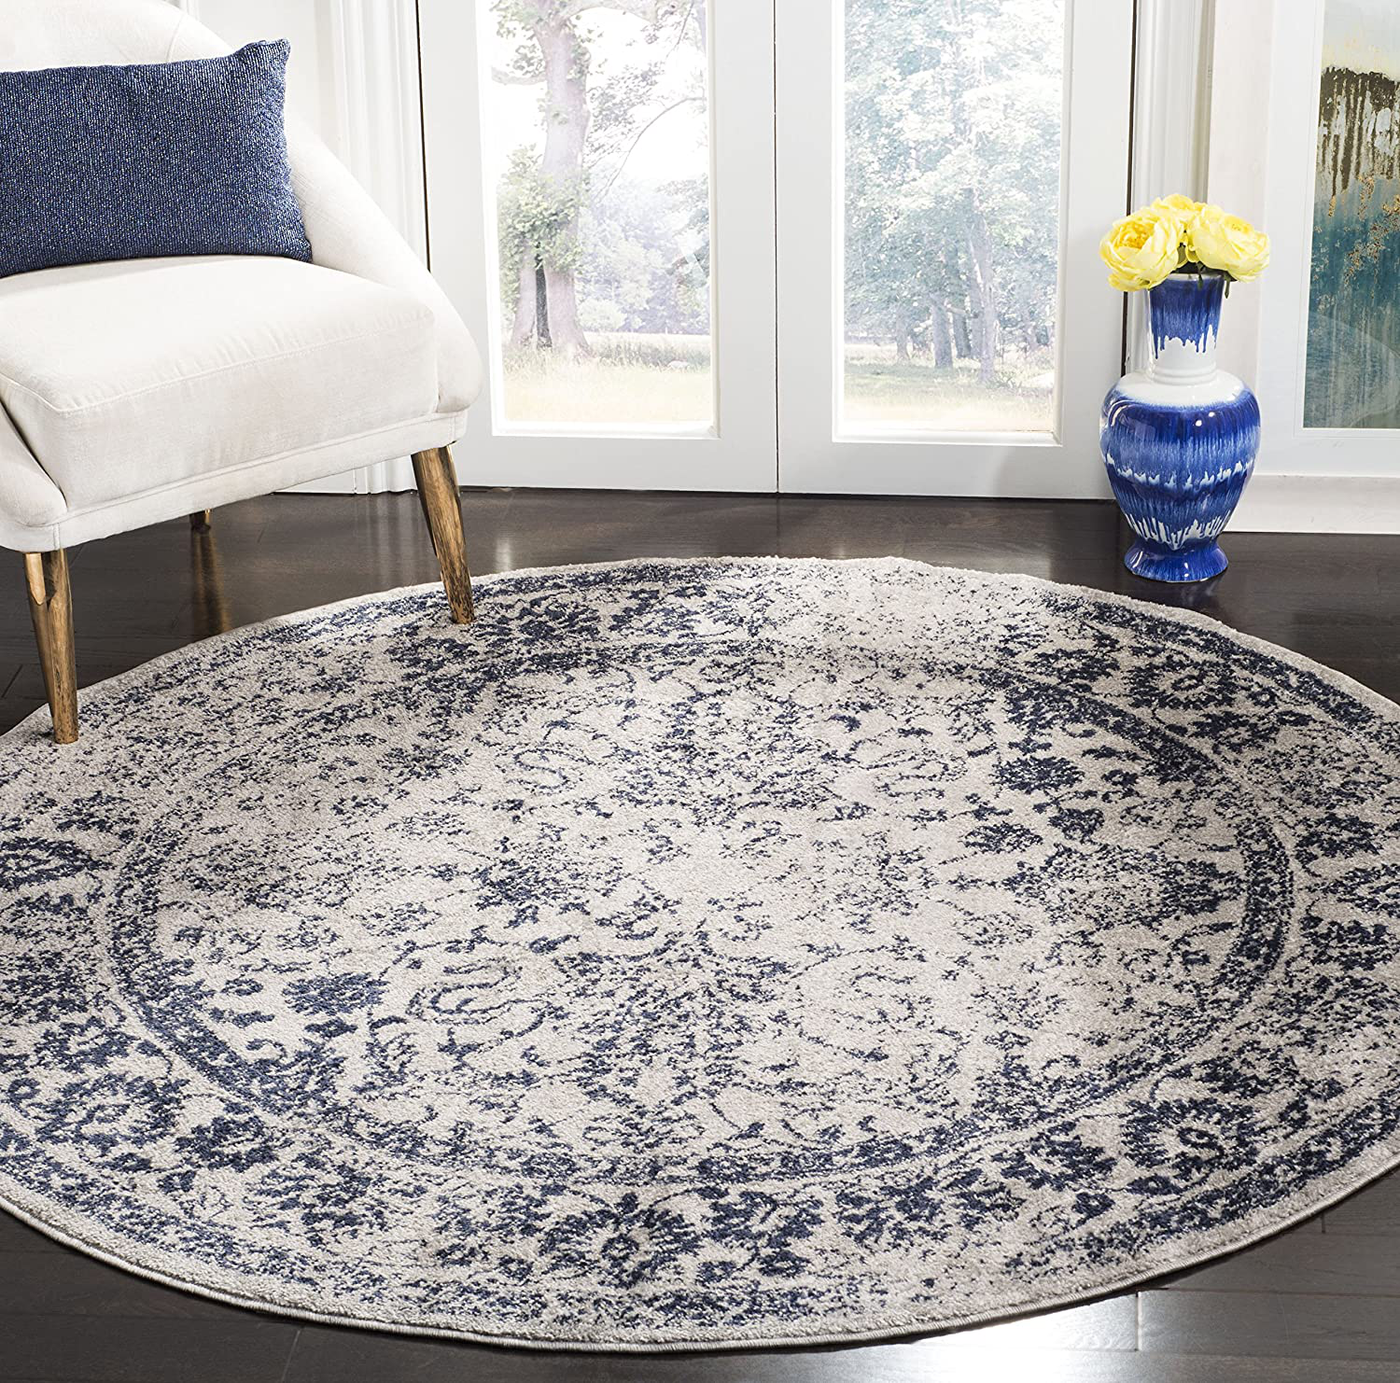 Safavieh Adirondack Collection ADR109P Oriental Distressed Non-Shedding Dining Room Entryway Foyer Living Room Bedroom Area Rug, 6' x 6' Round, Grey / Navy